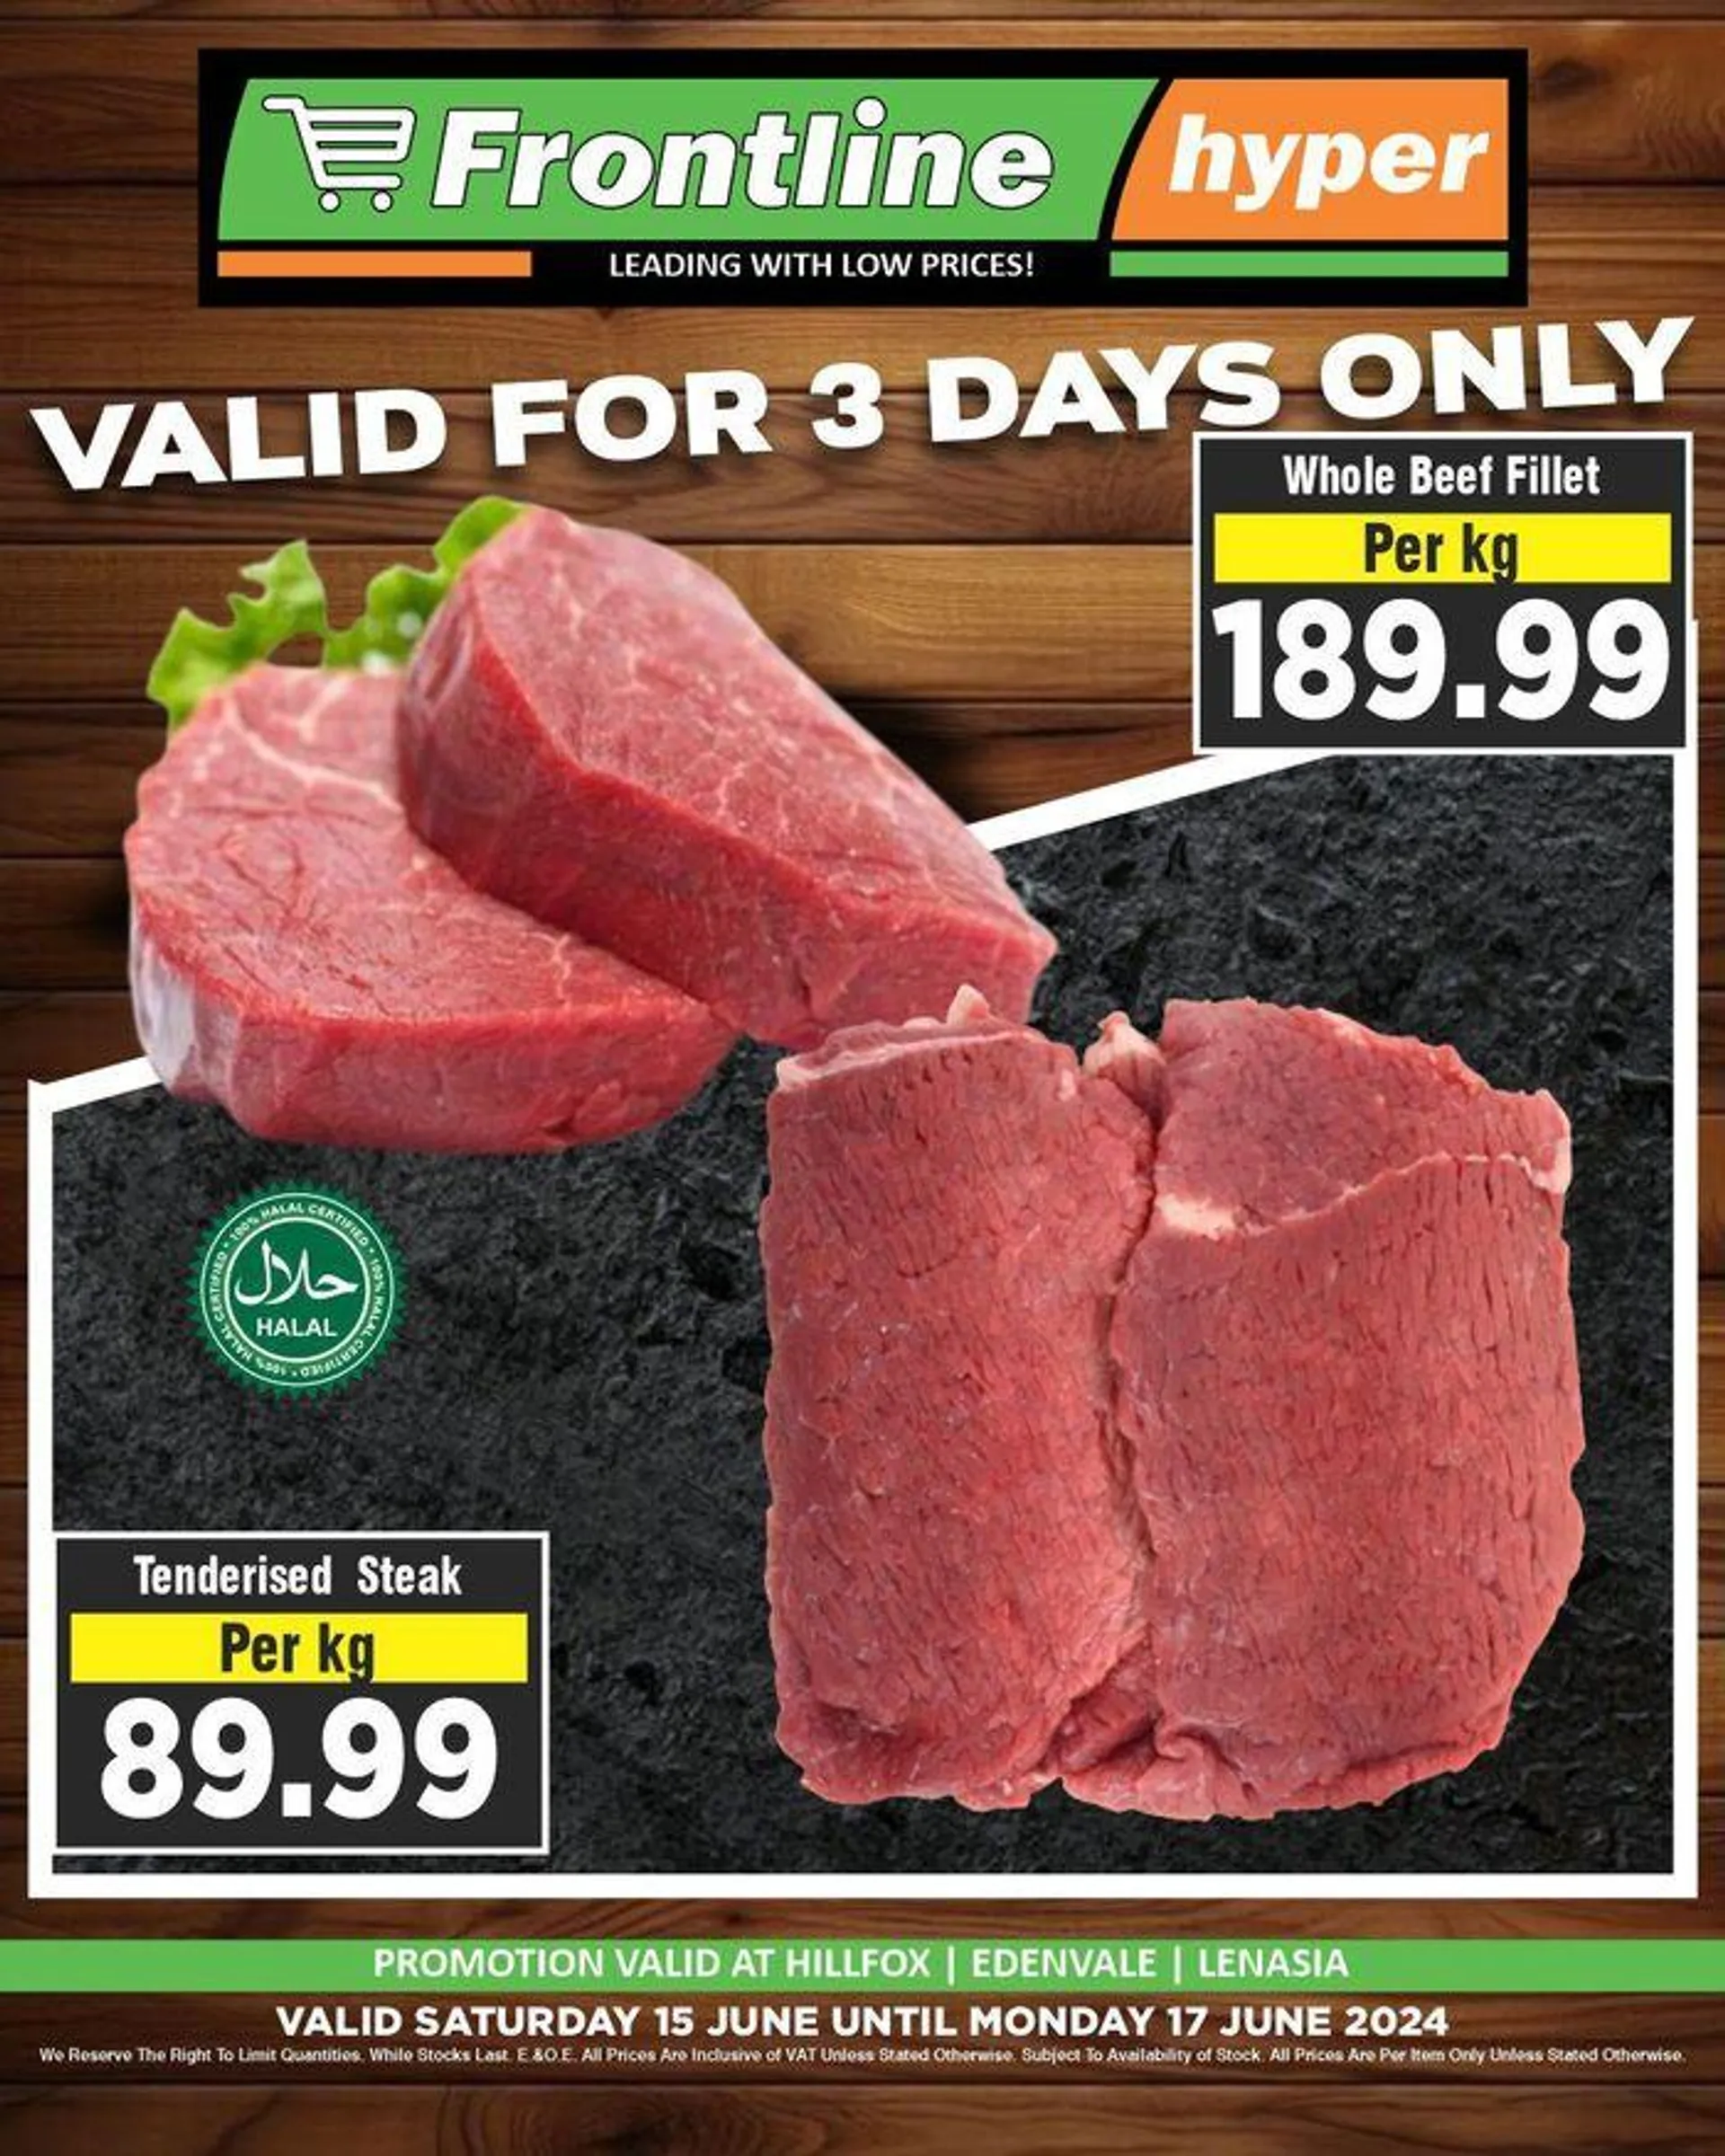 Weekly Butchery Special - 1